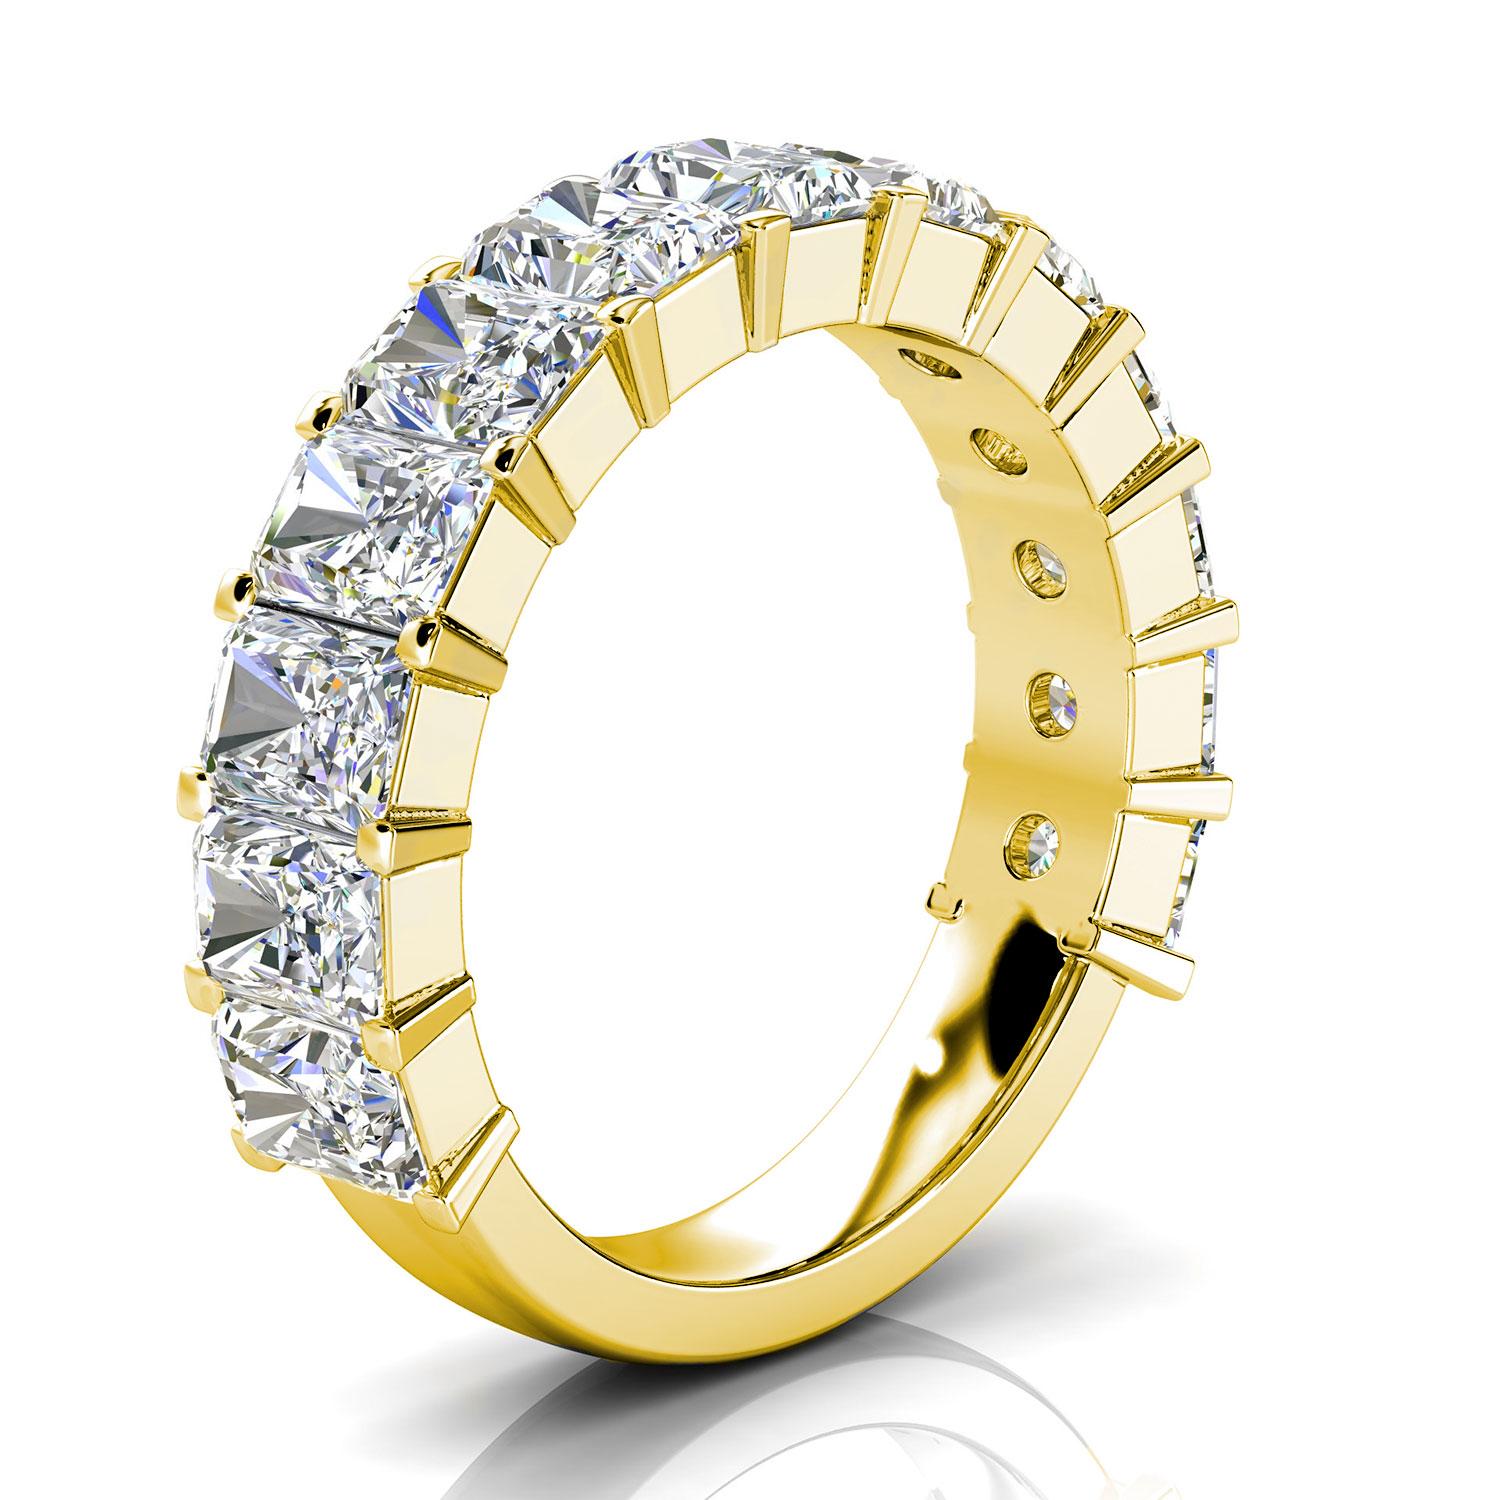 This Royalty ring features thirteen (13) Radiant Shape Diamonds Prong- Set approximately 1/2 a carat each on 3/4 of a 3.6 mm shank. It's a conversational piece! Experience the difference in person!

Product details: 

Center Gemstone Type: NATURAL